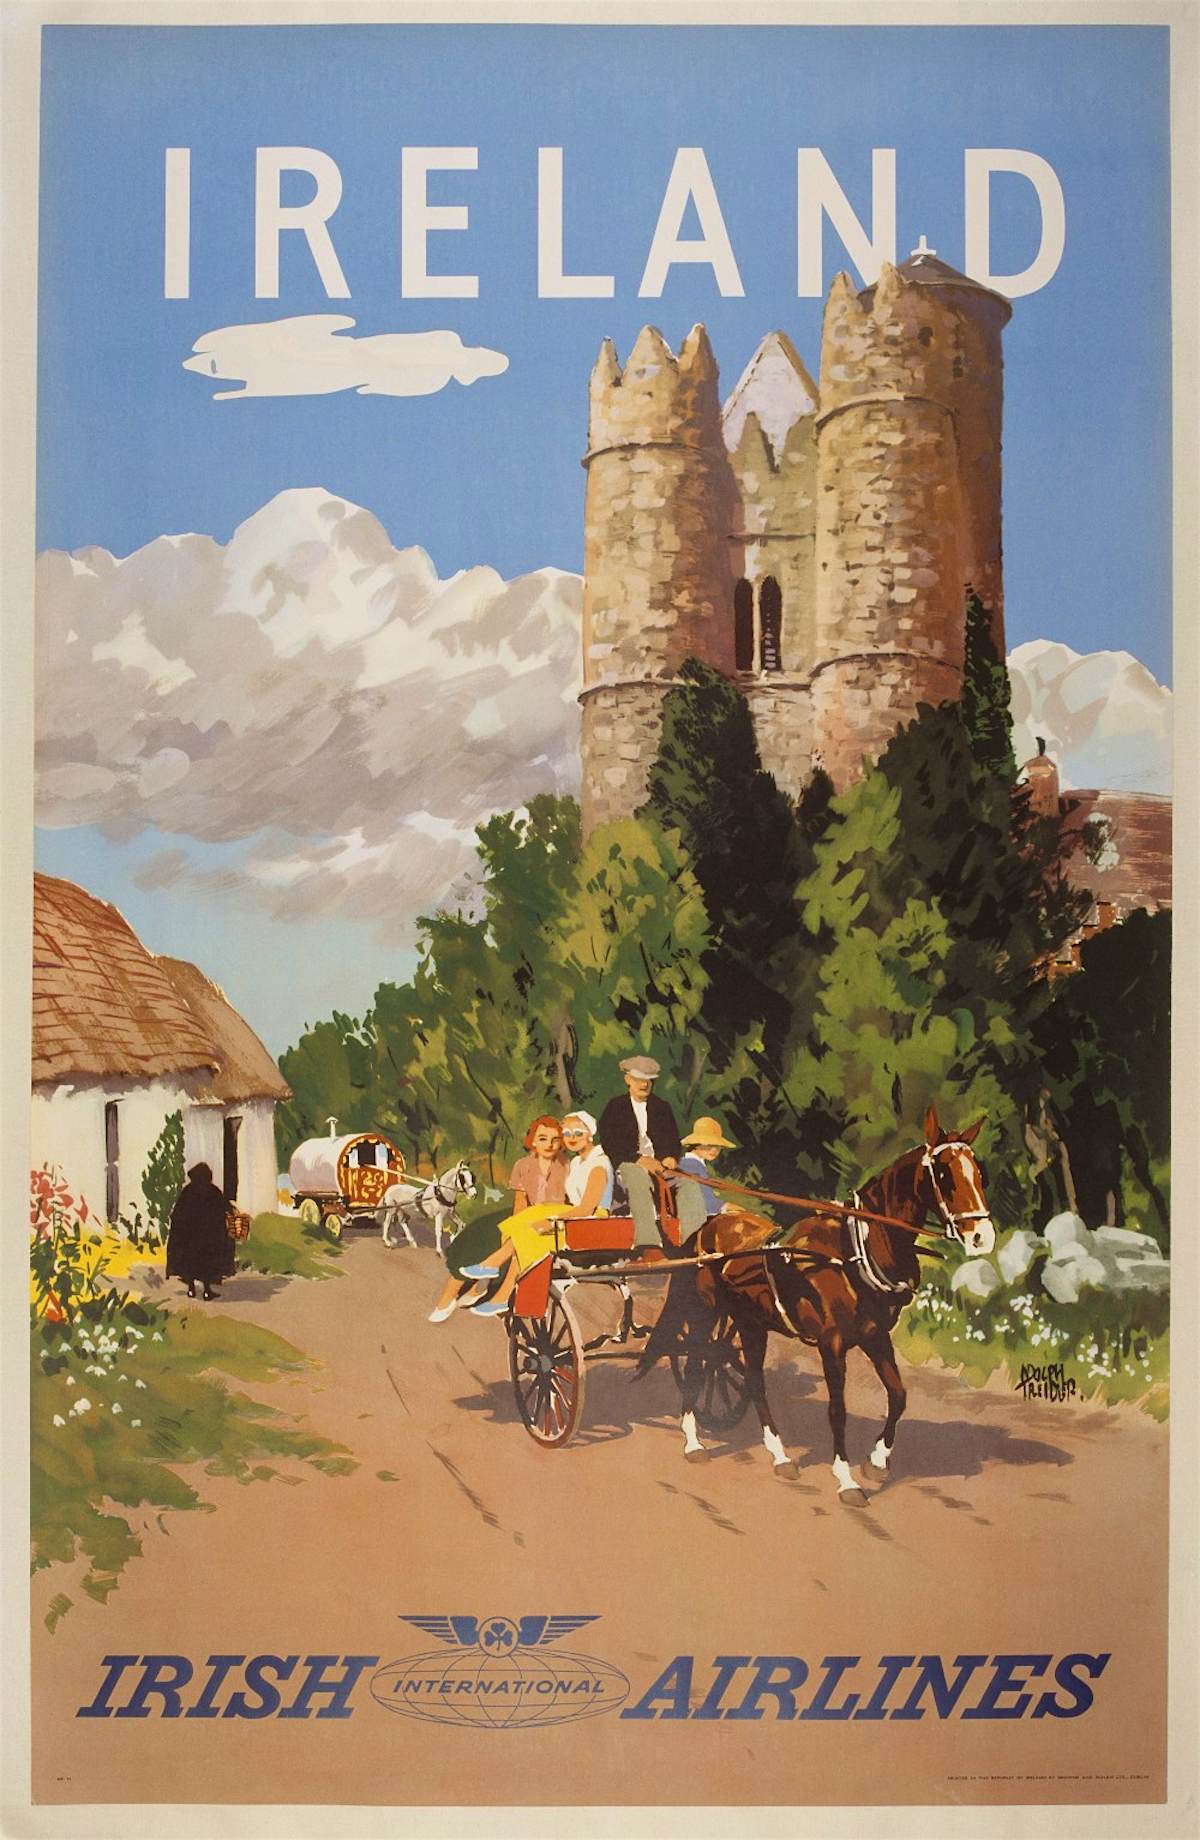 Step back in time with vintage tourism posters depicting romantic